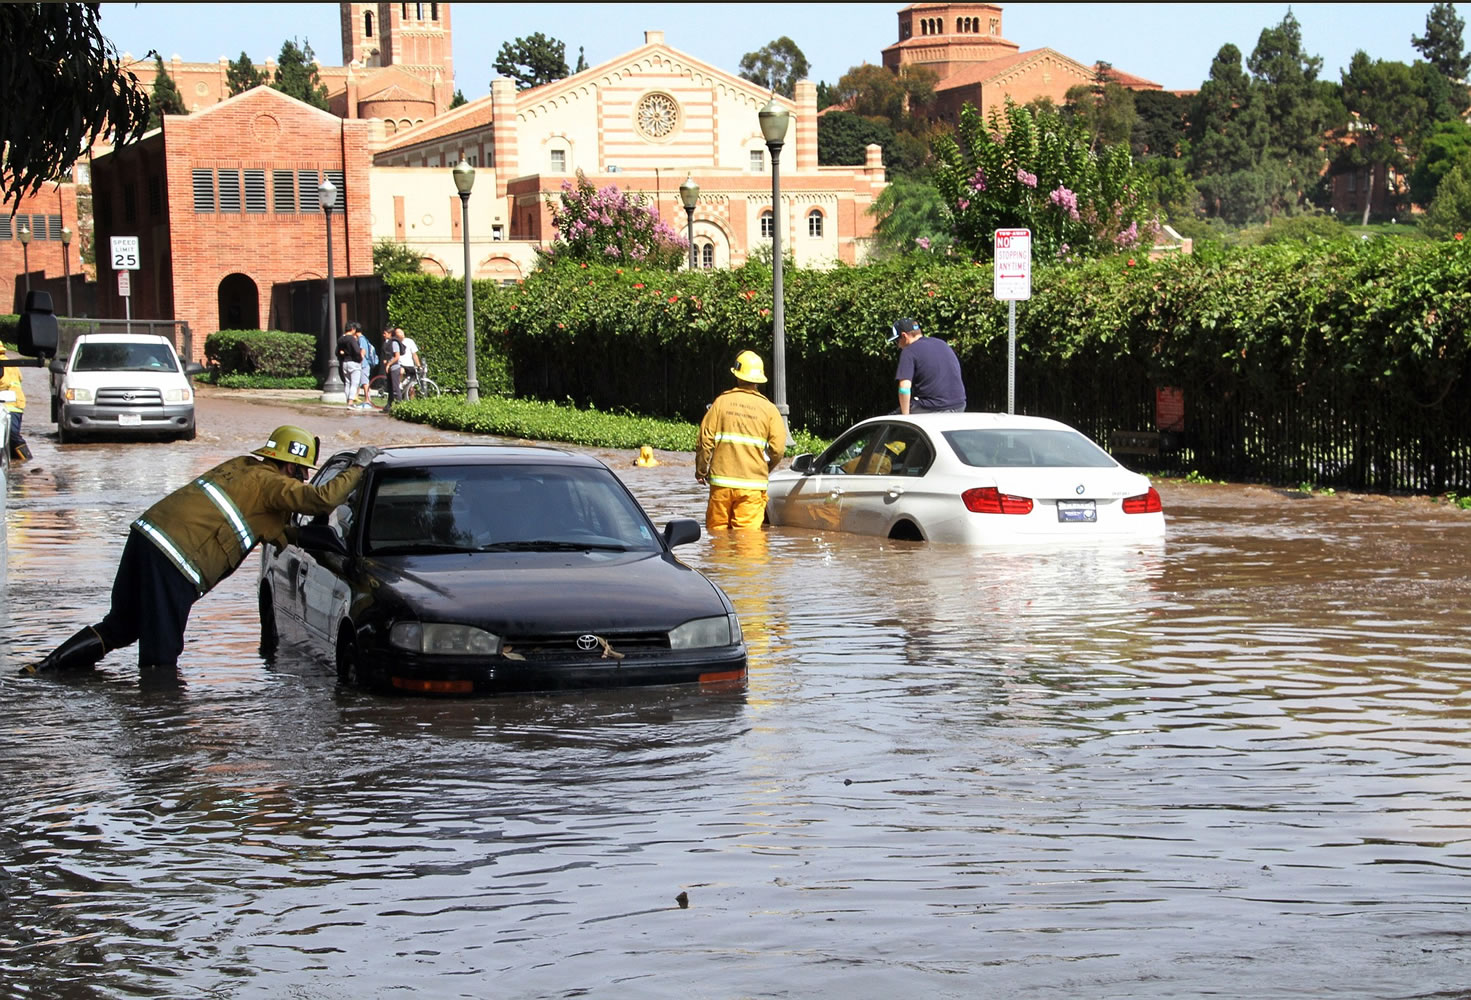 Los Angeles firefighters help drivers whose cars became stranded on Sunset Boulevard after a 30-inch water main broke and sent water flooding down Sunset and onto the UCLA campus, background, in the Westwood section of Los Angeles on Tuesday.